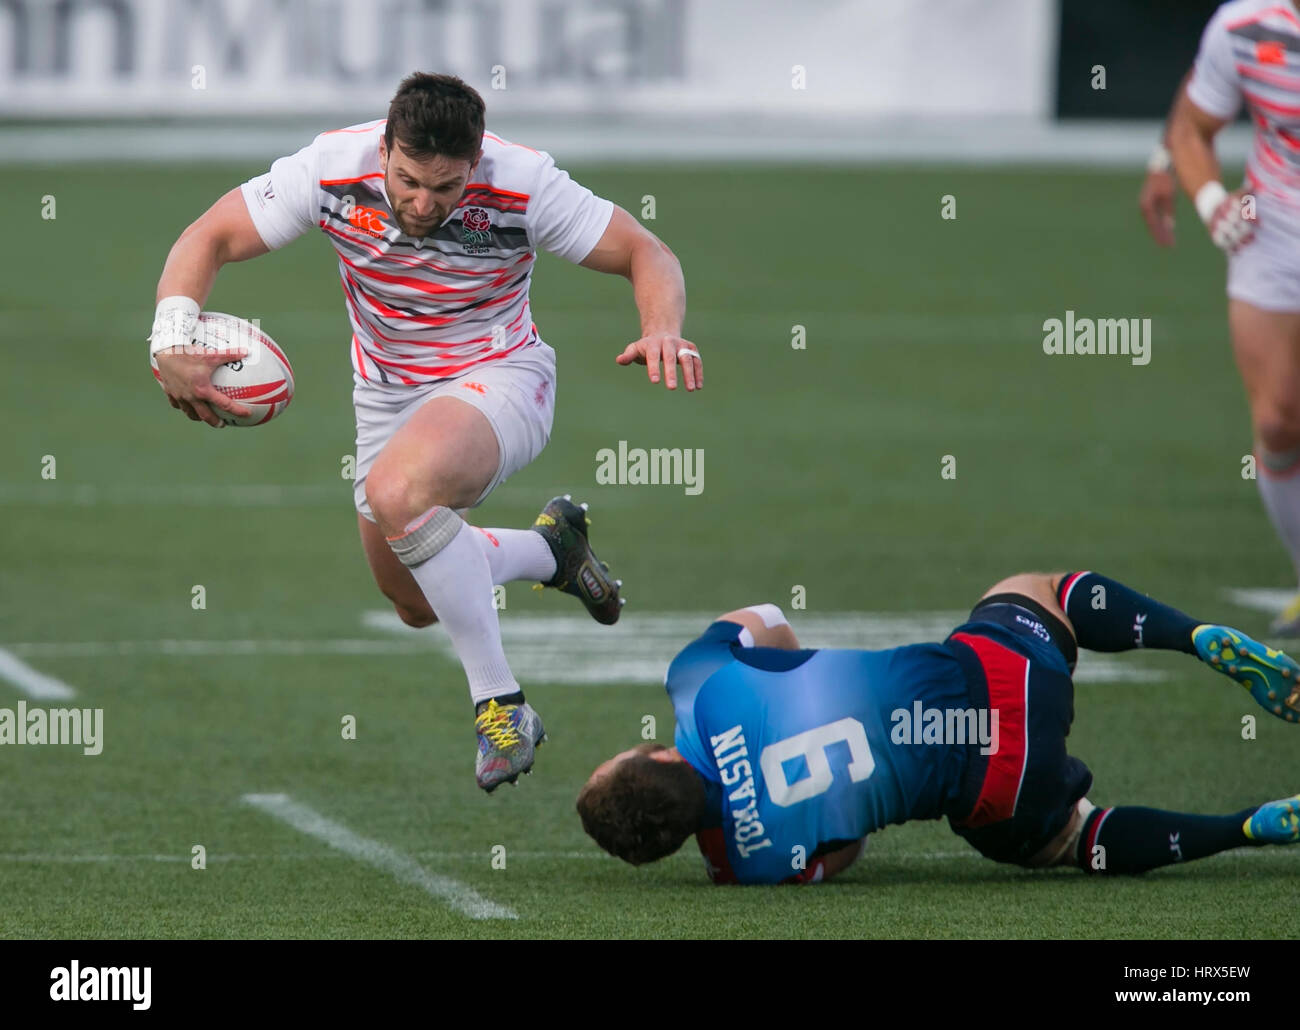 Las Vegas, NV, USA. 4th Mar, 2017. Charlie Hayter #2 of England in action during Pool B play of the rugby sevens match between the USA and England at Sam Boyd Stadium in Las Vegas, Nv. England defeated the US 24-17. Damon Tarver/Cal Sport Media/Alamy Live News Stock Photo